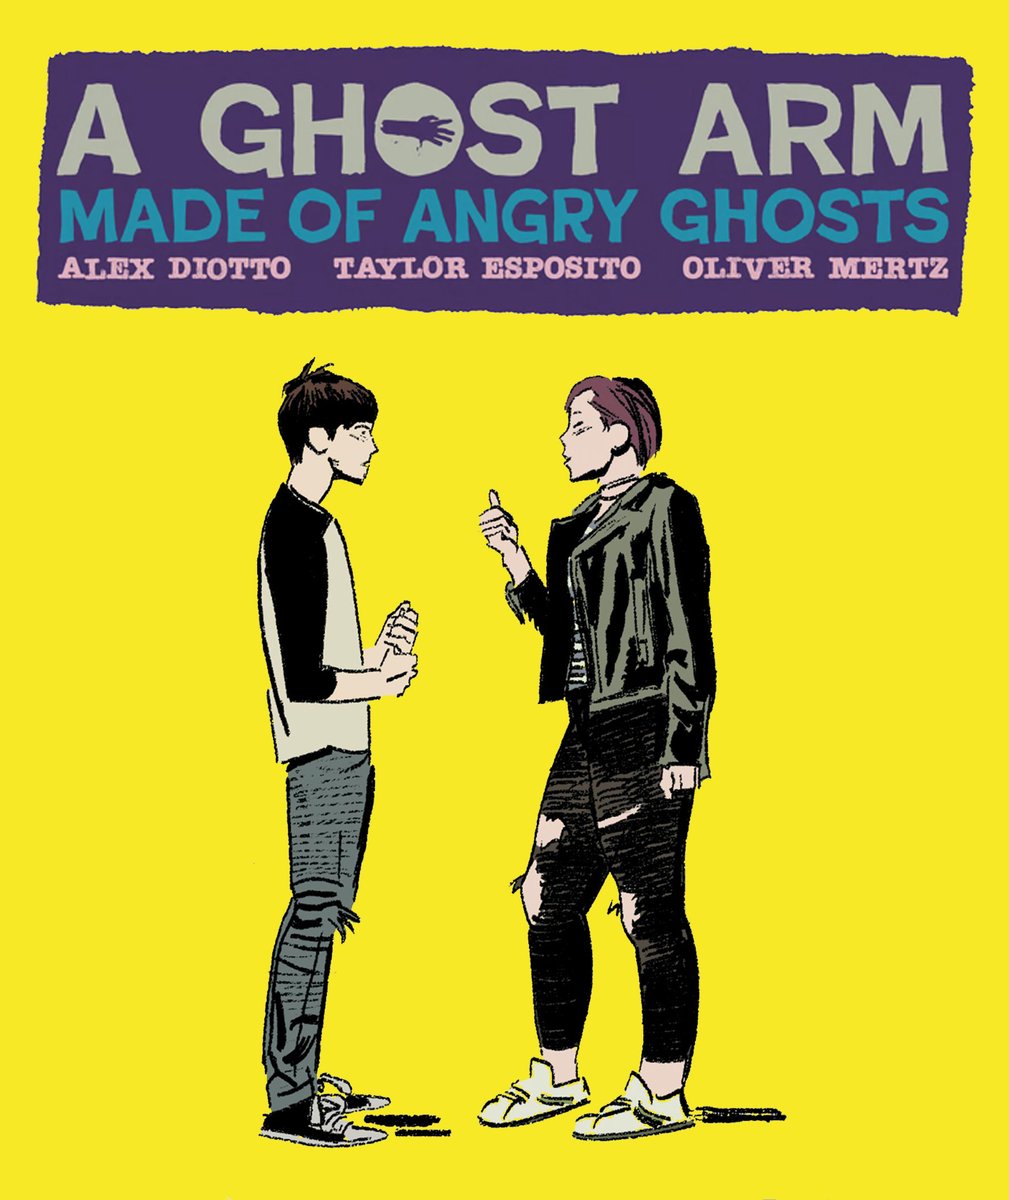 A GHOST ARM MADE OF ANGRY GHOSTS is live on Kickstarter! Help us reach our goal by spreading the word and RT pls. We need to make this book happen! kickstarter.com/projects/olive…